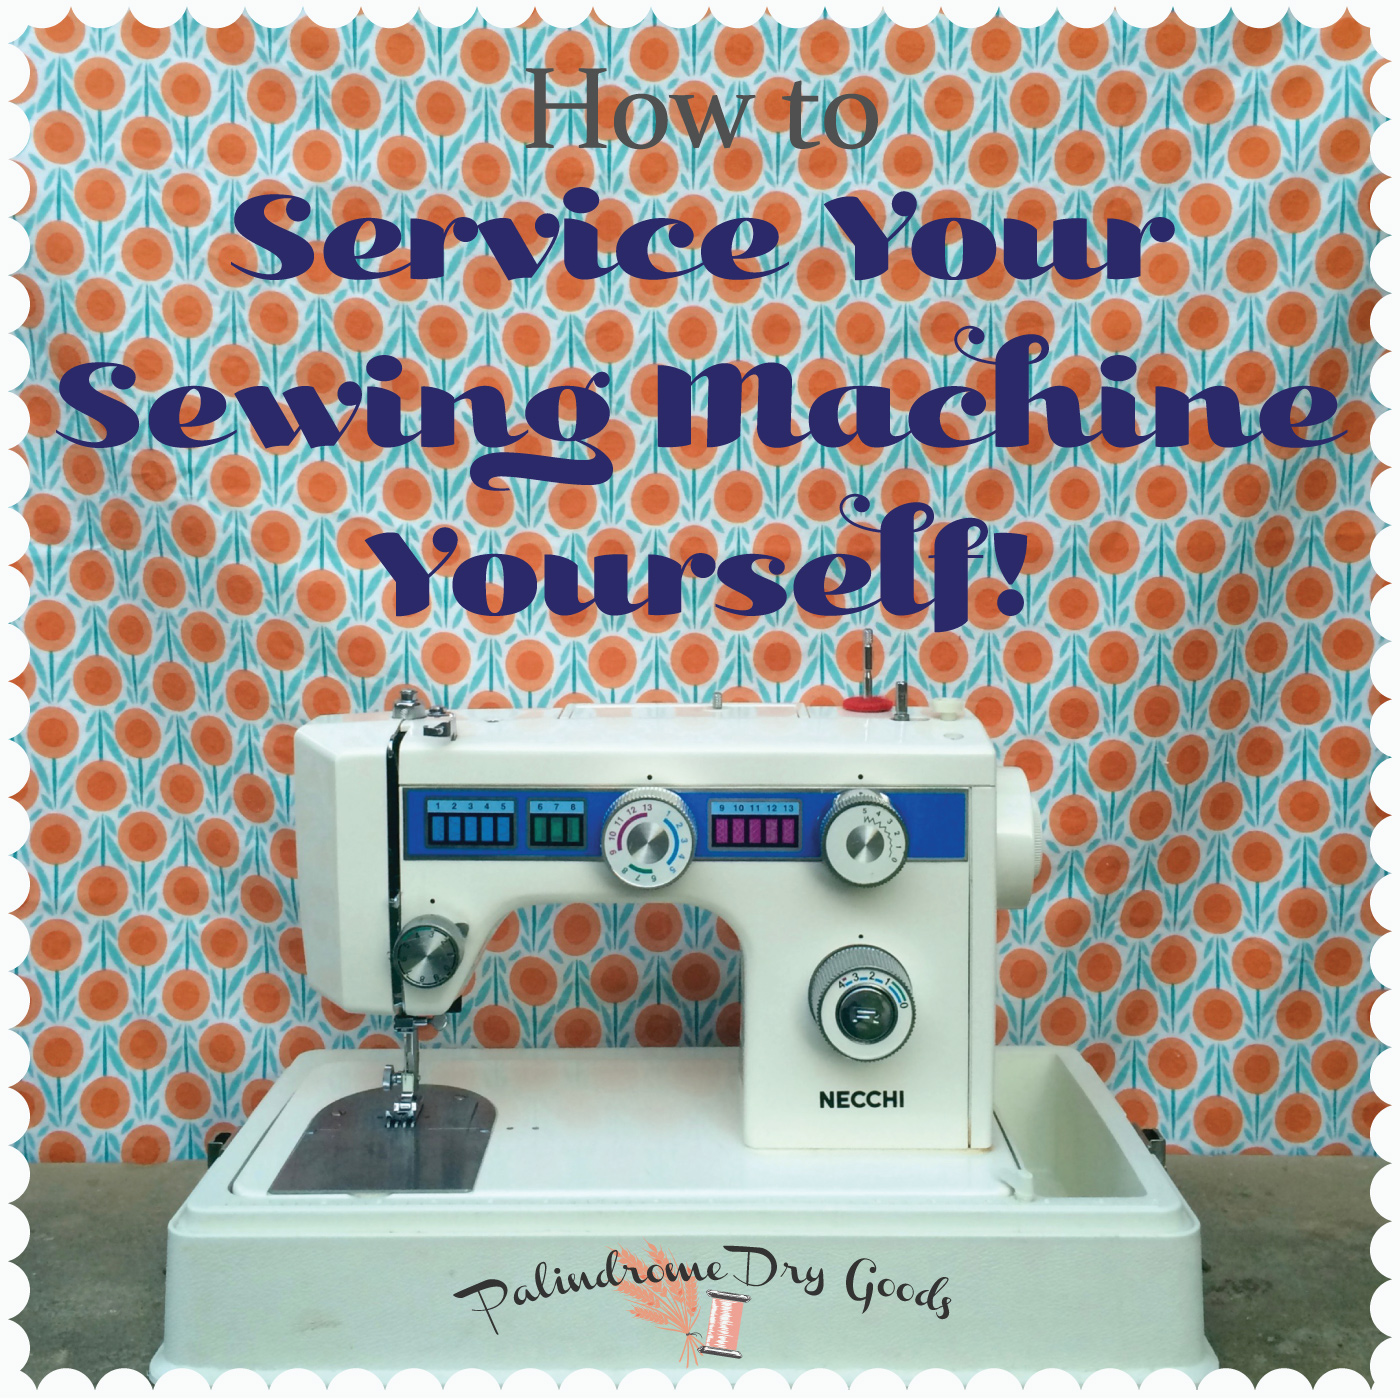 Can Your Sewing Machine Do This?